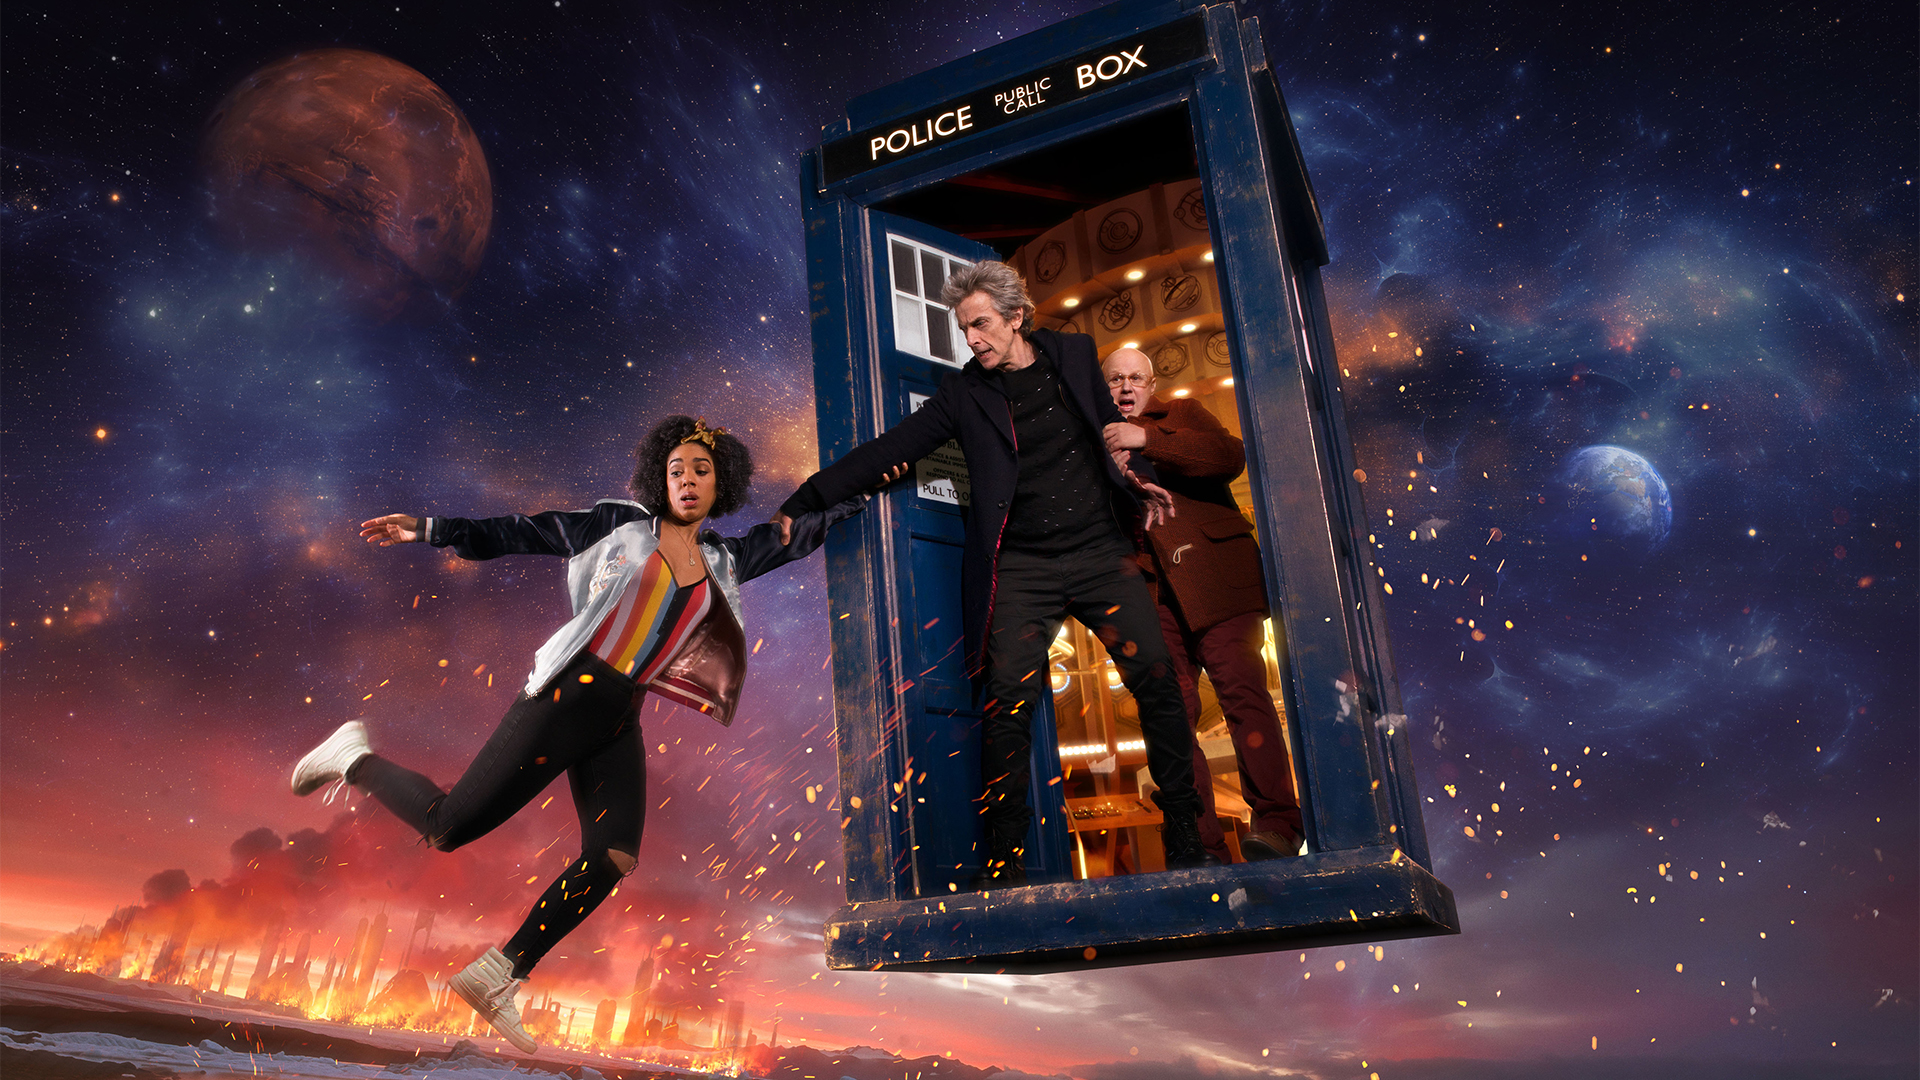 New Doctor Who Trailer Promises An Epic Season | Space